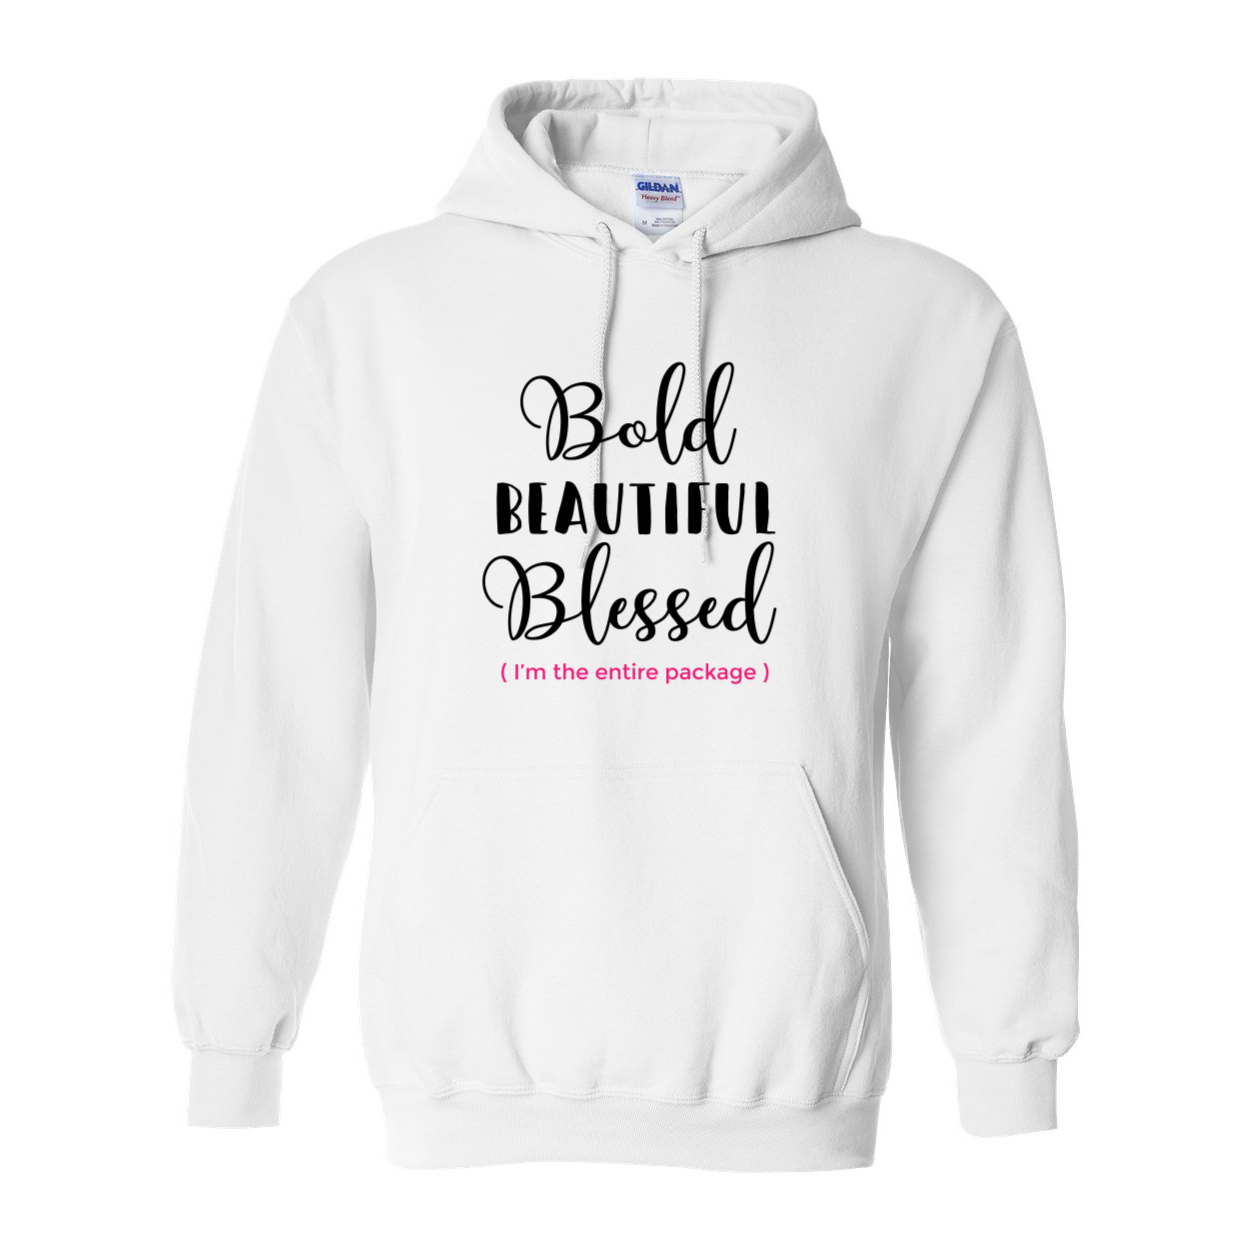 Bold, Beautiful, Blessed Empowerment Hoodies